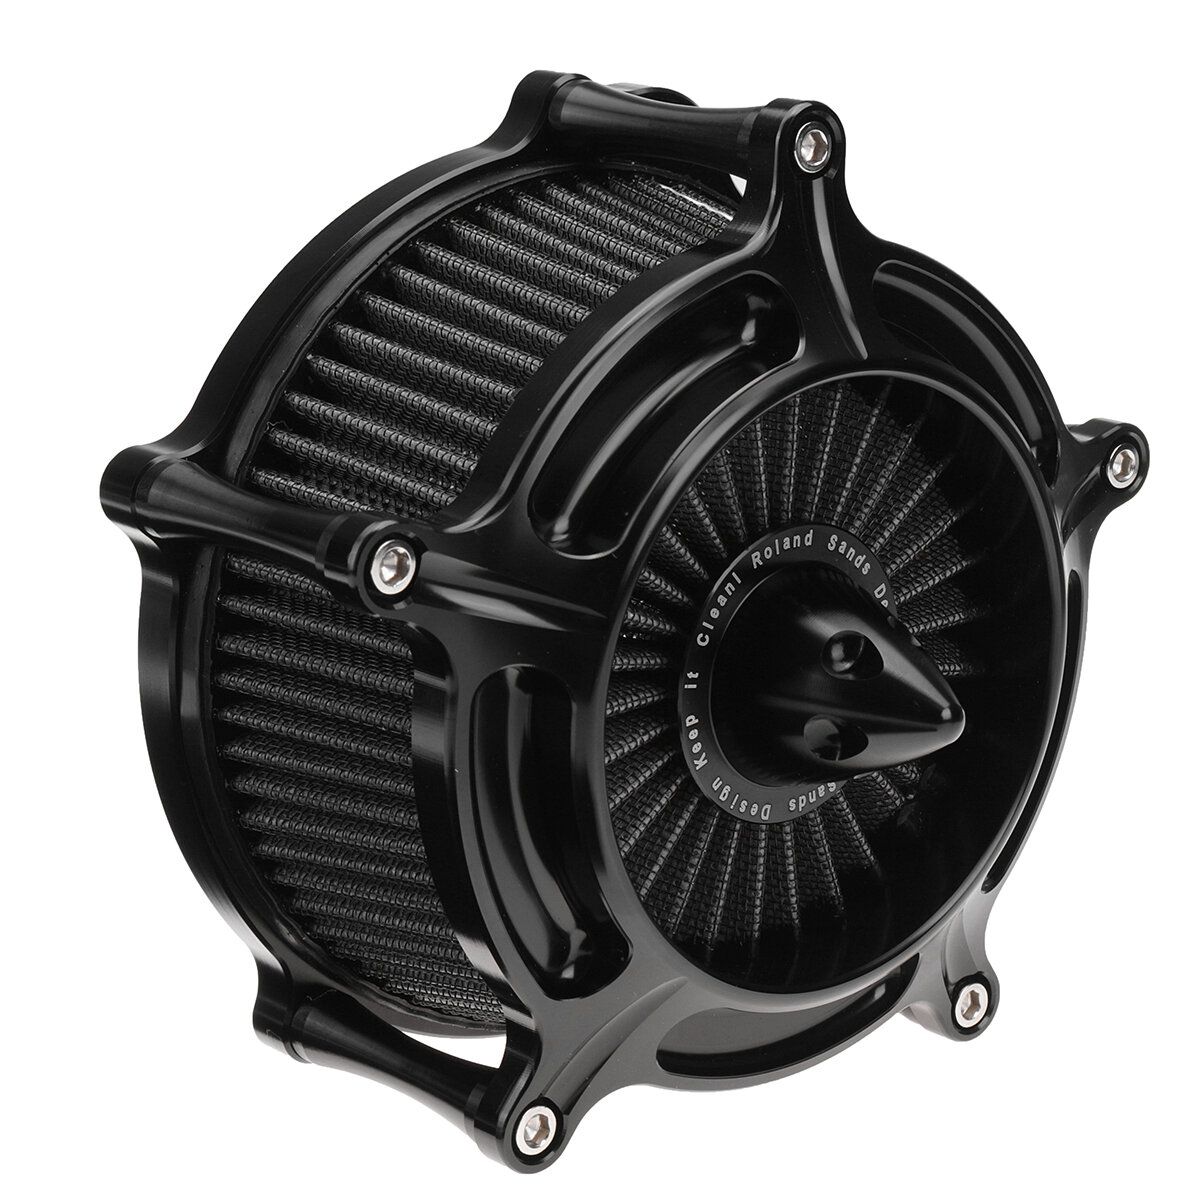 Image of Turbine Air Intake Filter Cleaner For Harley for Sportster XL883 1200 XL1200S